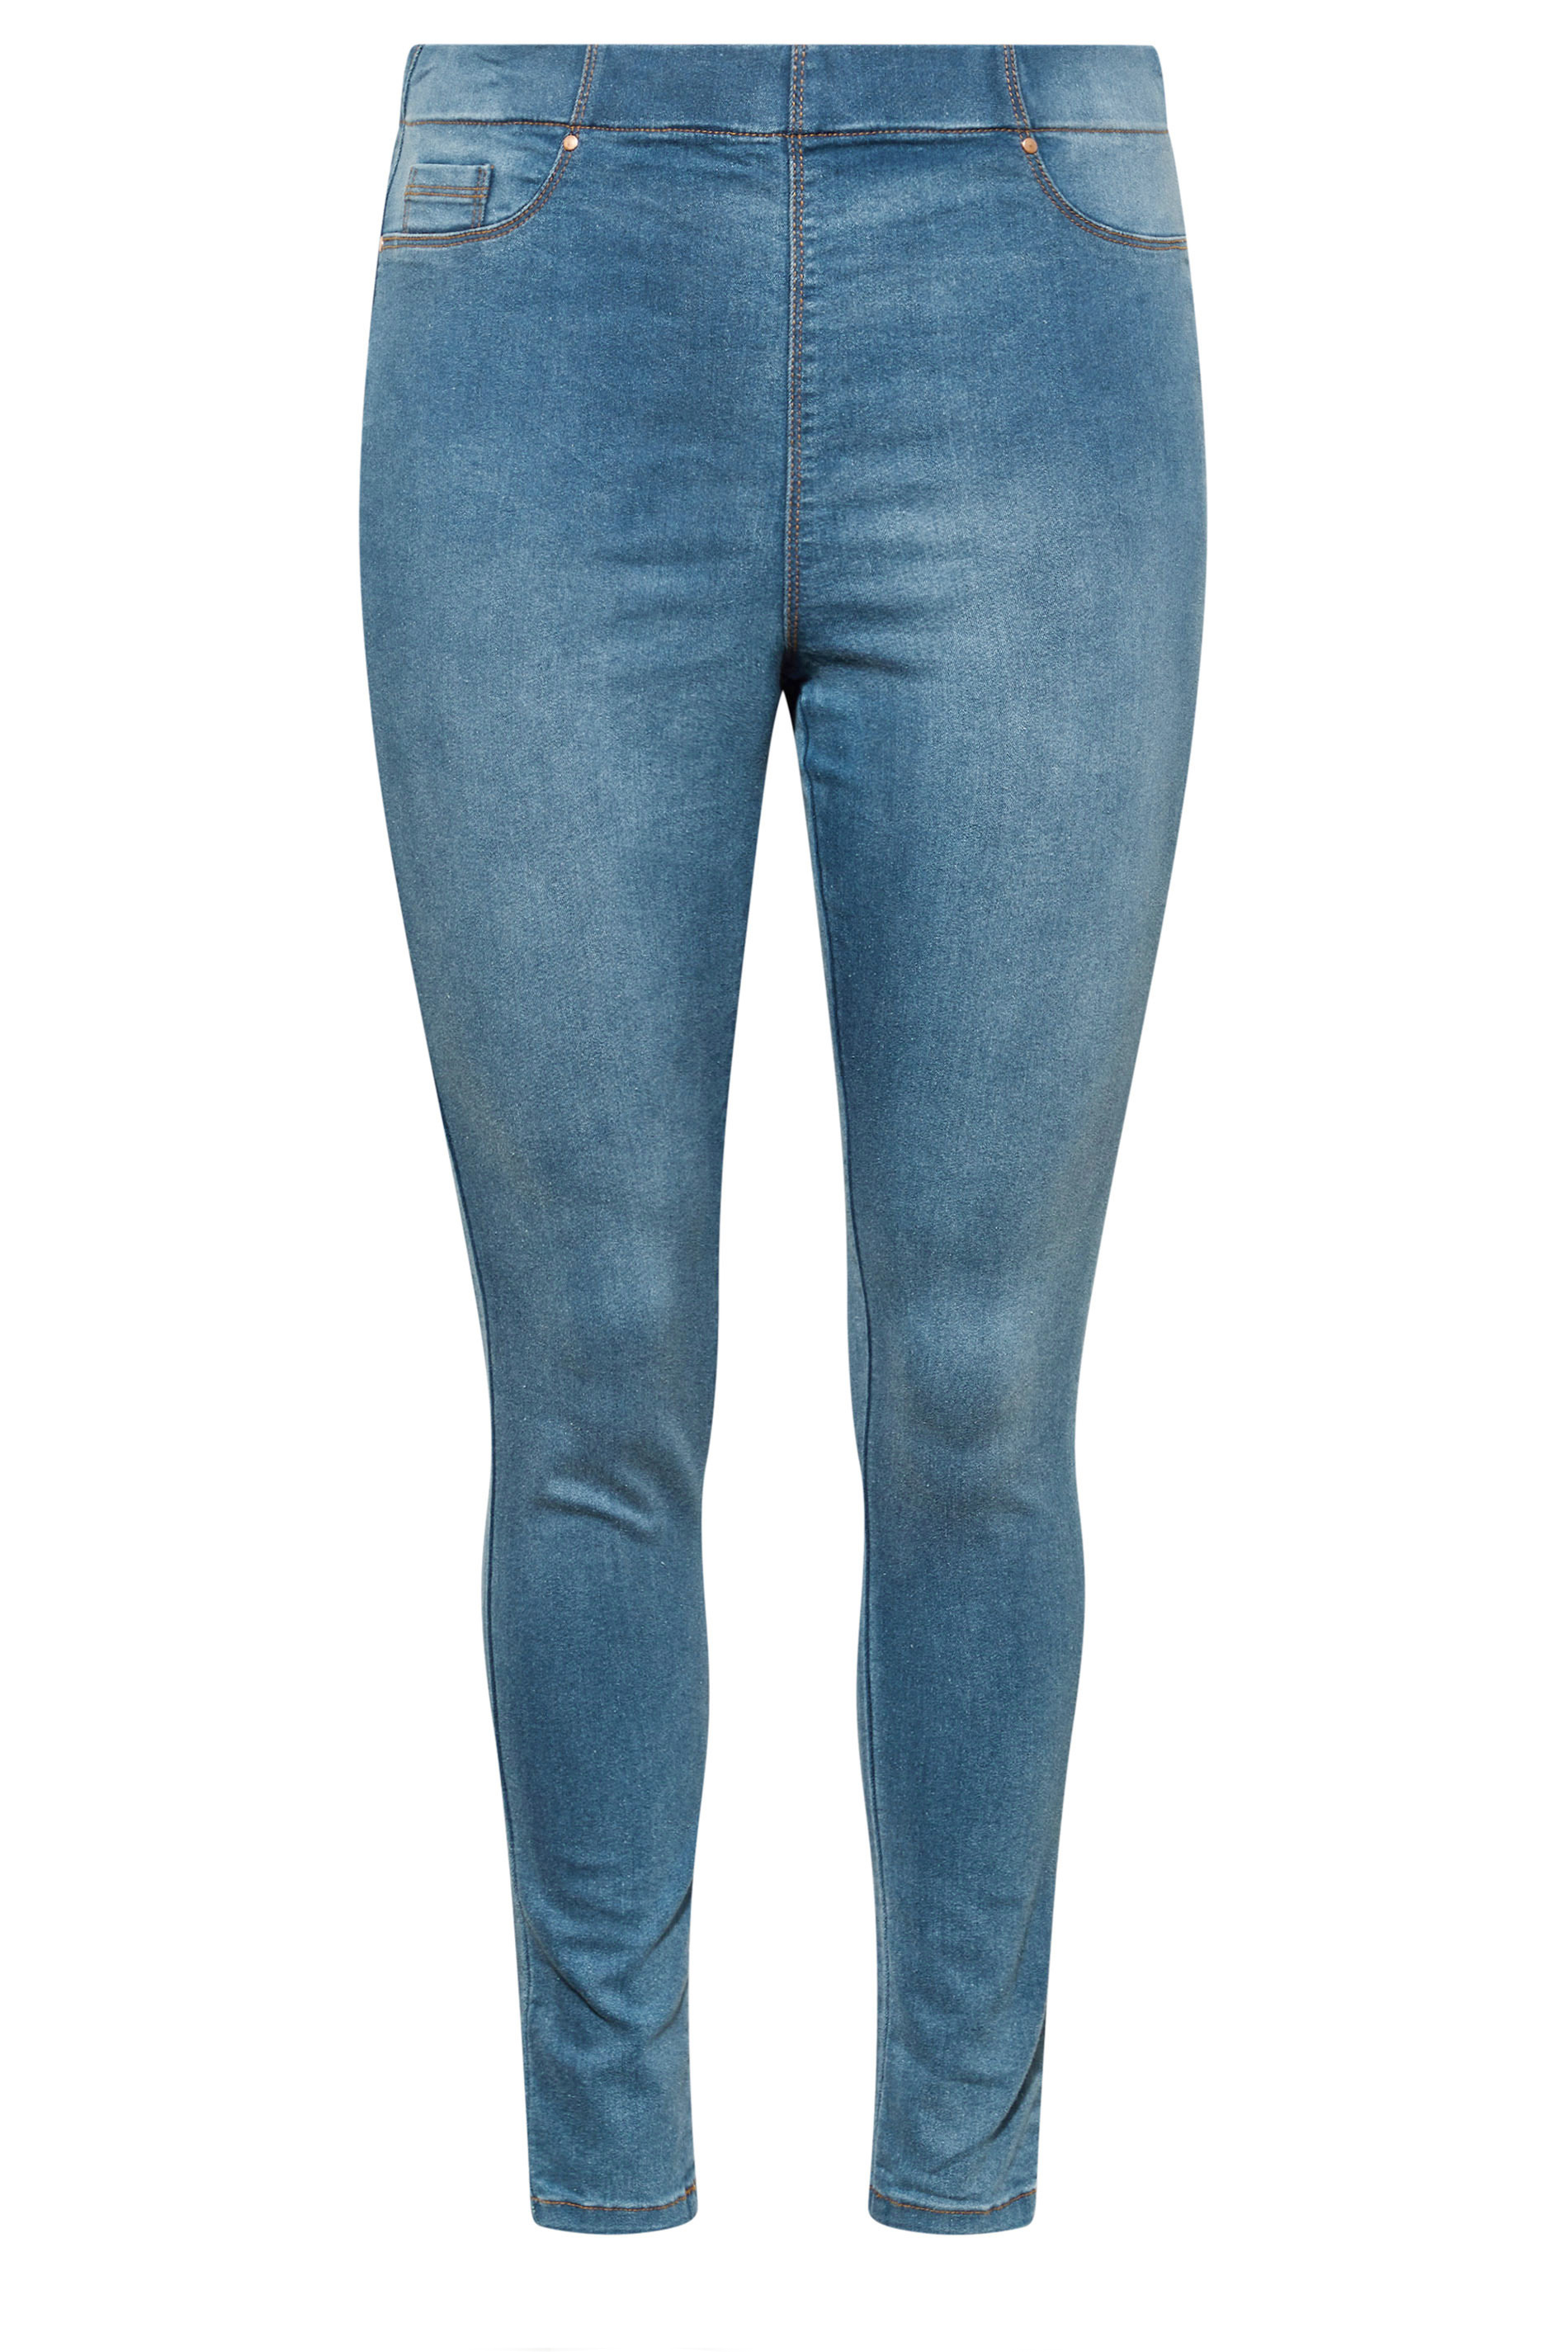 jeggings with fur inside - OFF-61% >Free Delivery